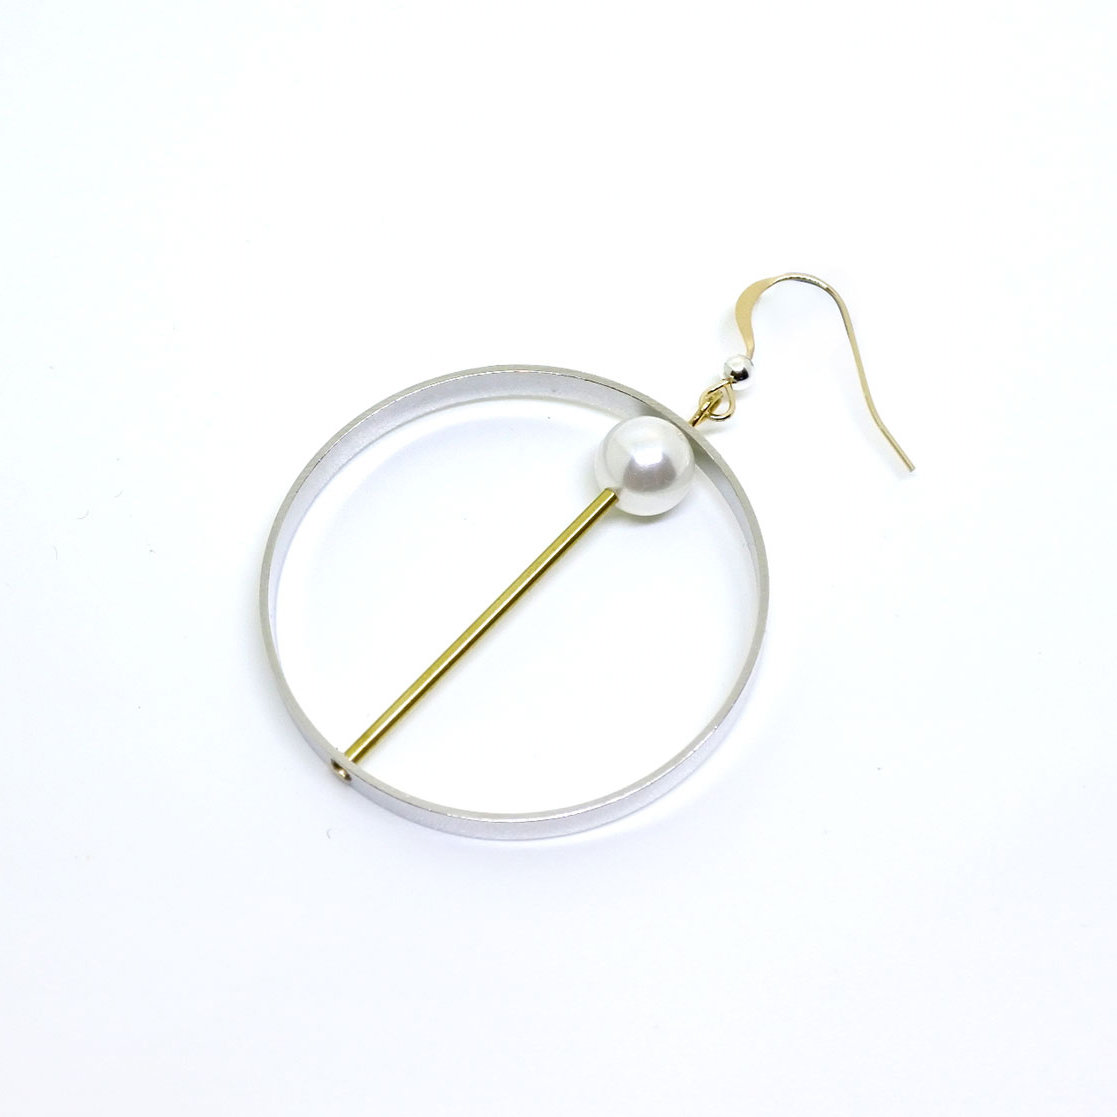 Asymmetrical earring — designer shop, Gifts For Her, Fashion Accessories 